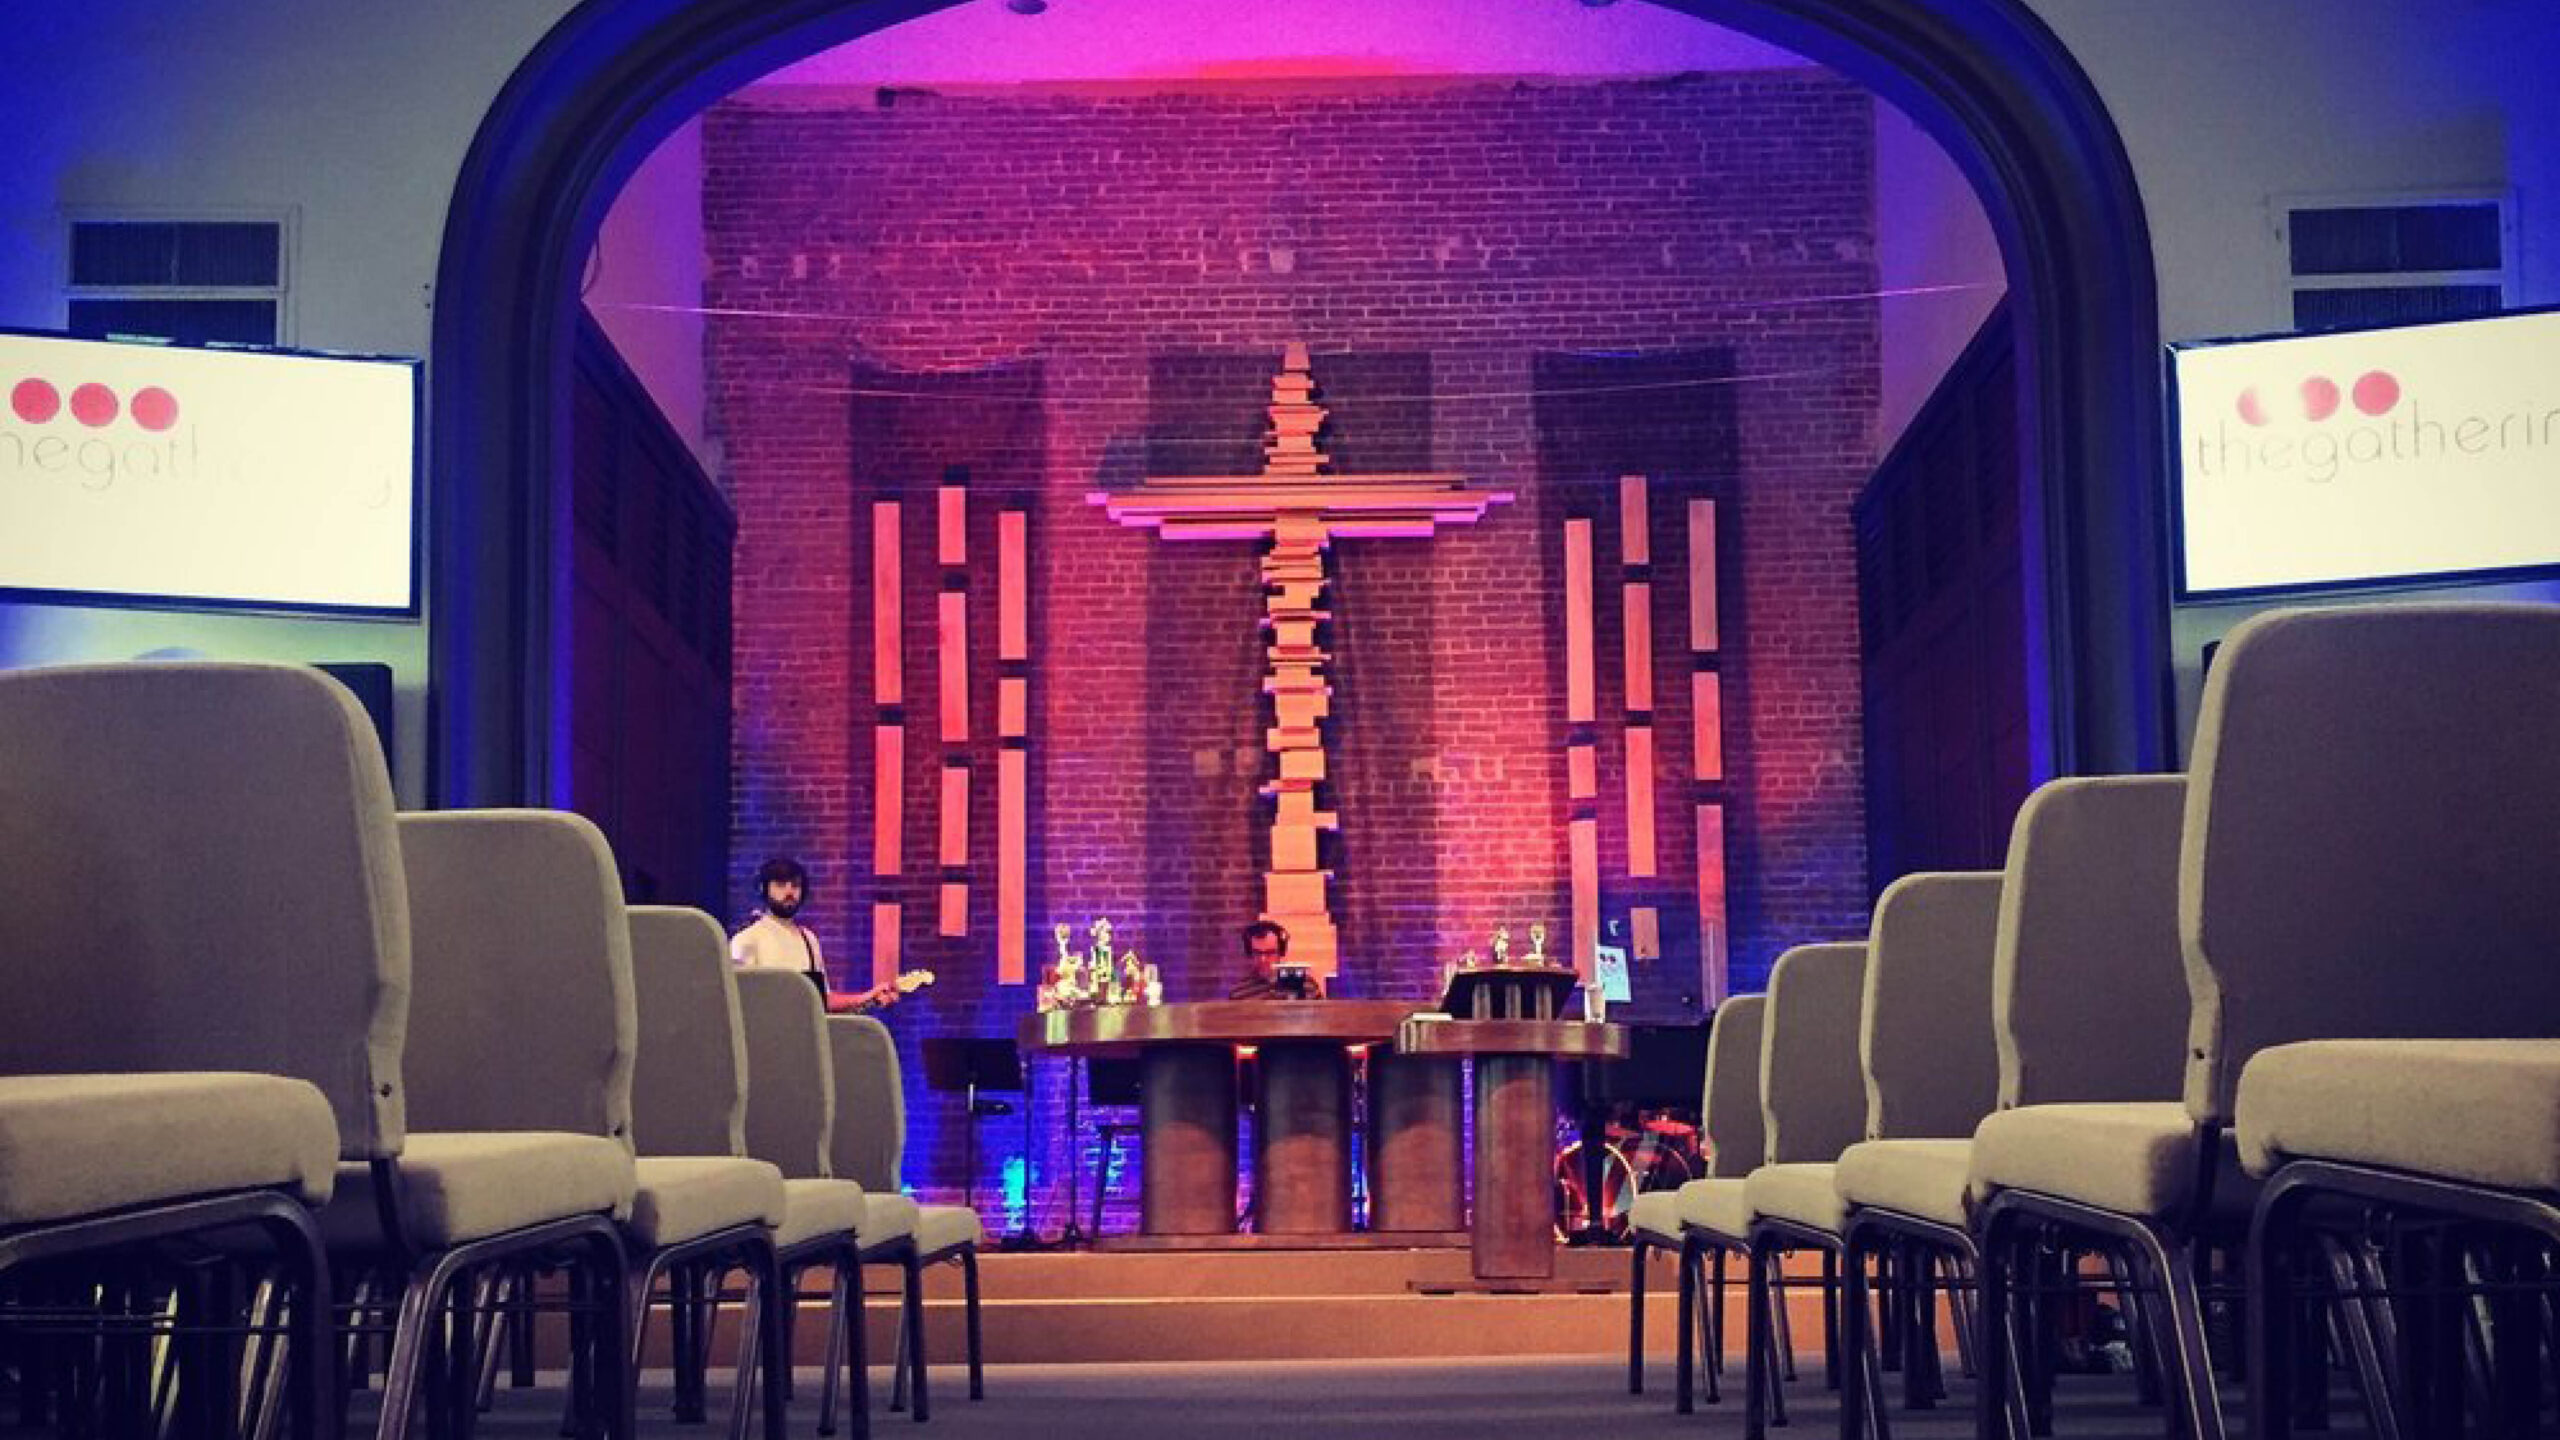 Church sanctuary seating with screens on either side of the stage